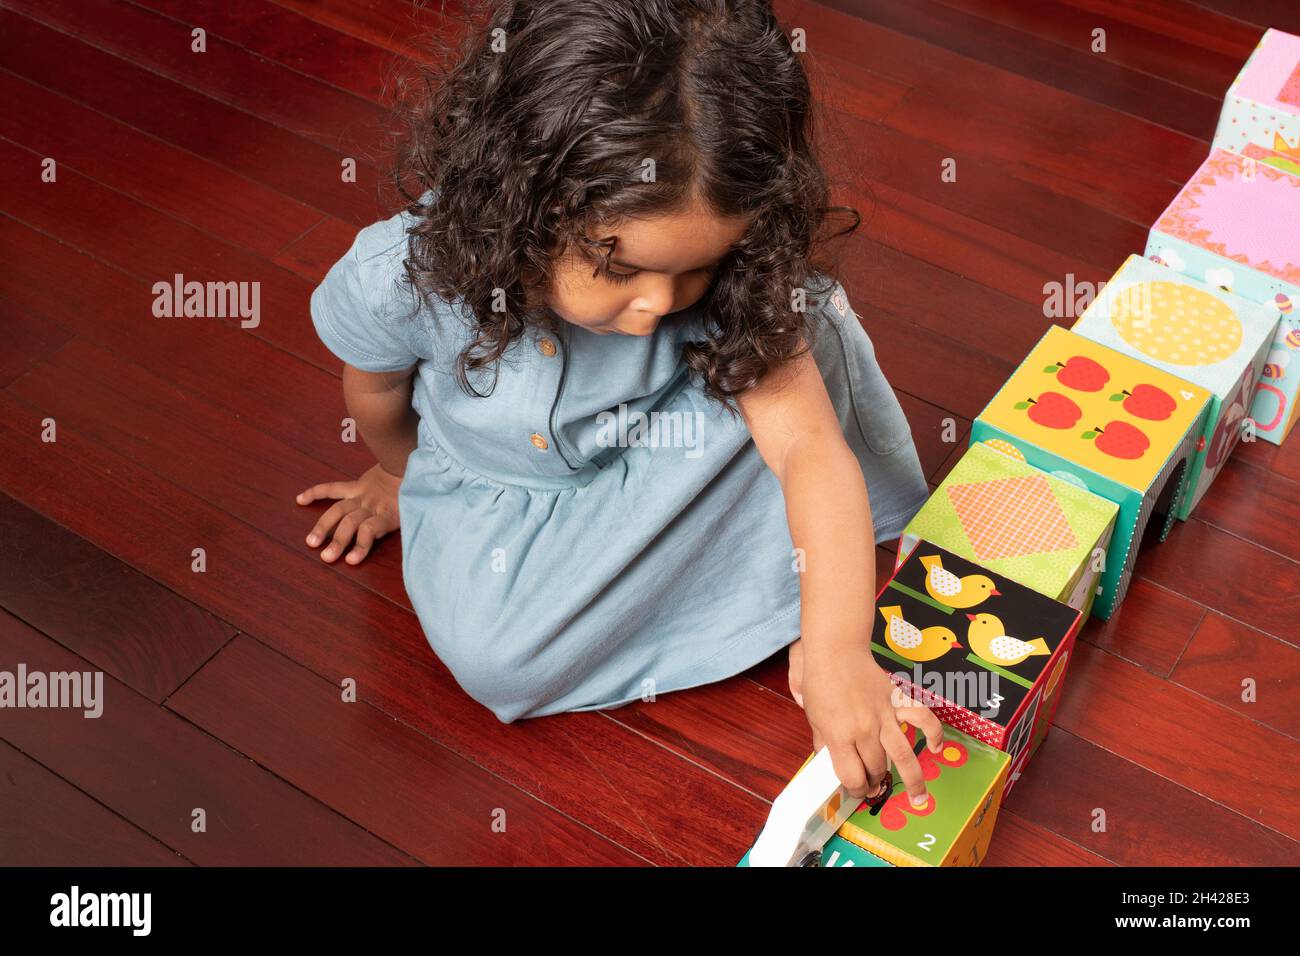 2 year old toddler girl playing with toy car and road made out of cardboard blocks Stock Photo